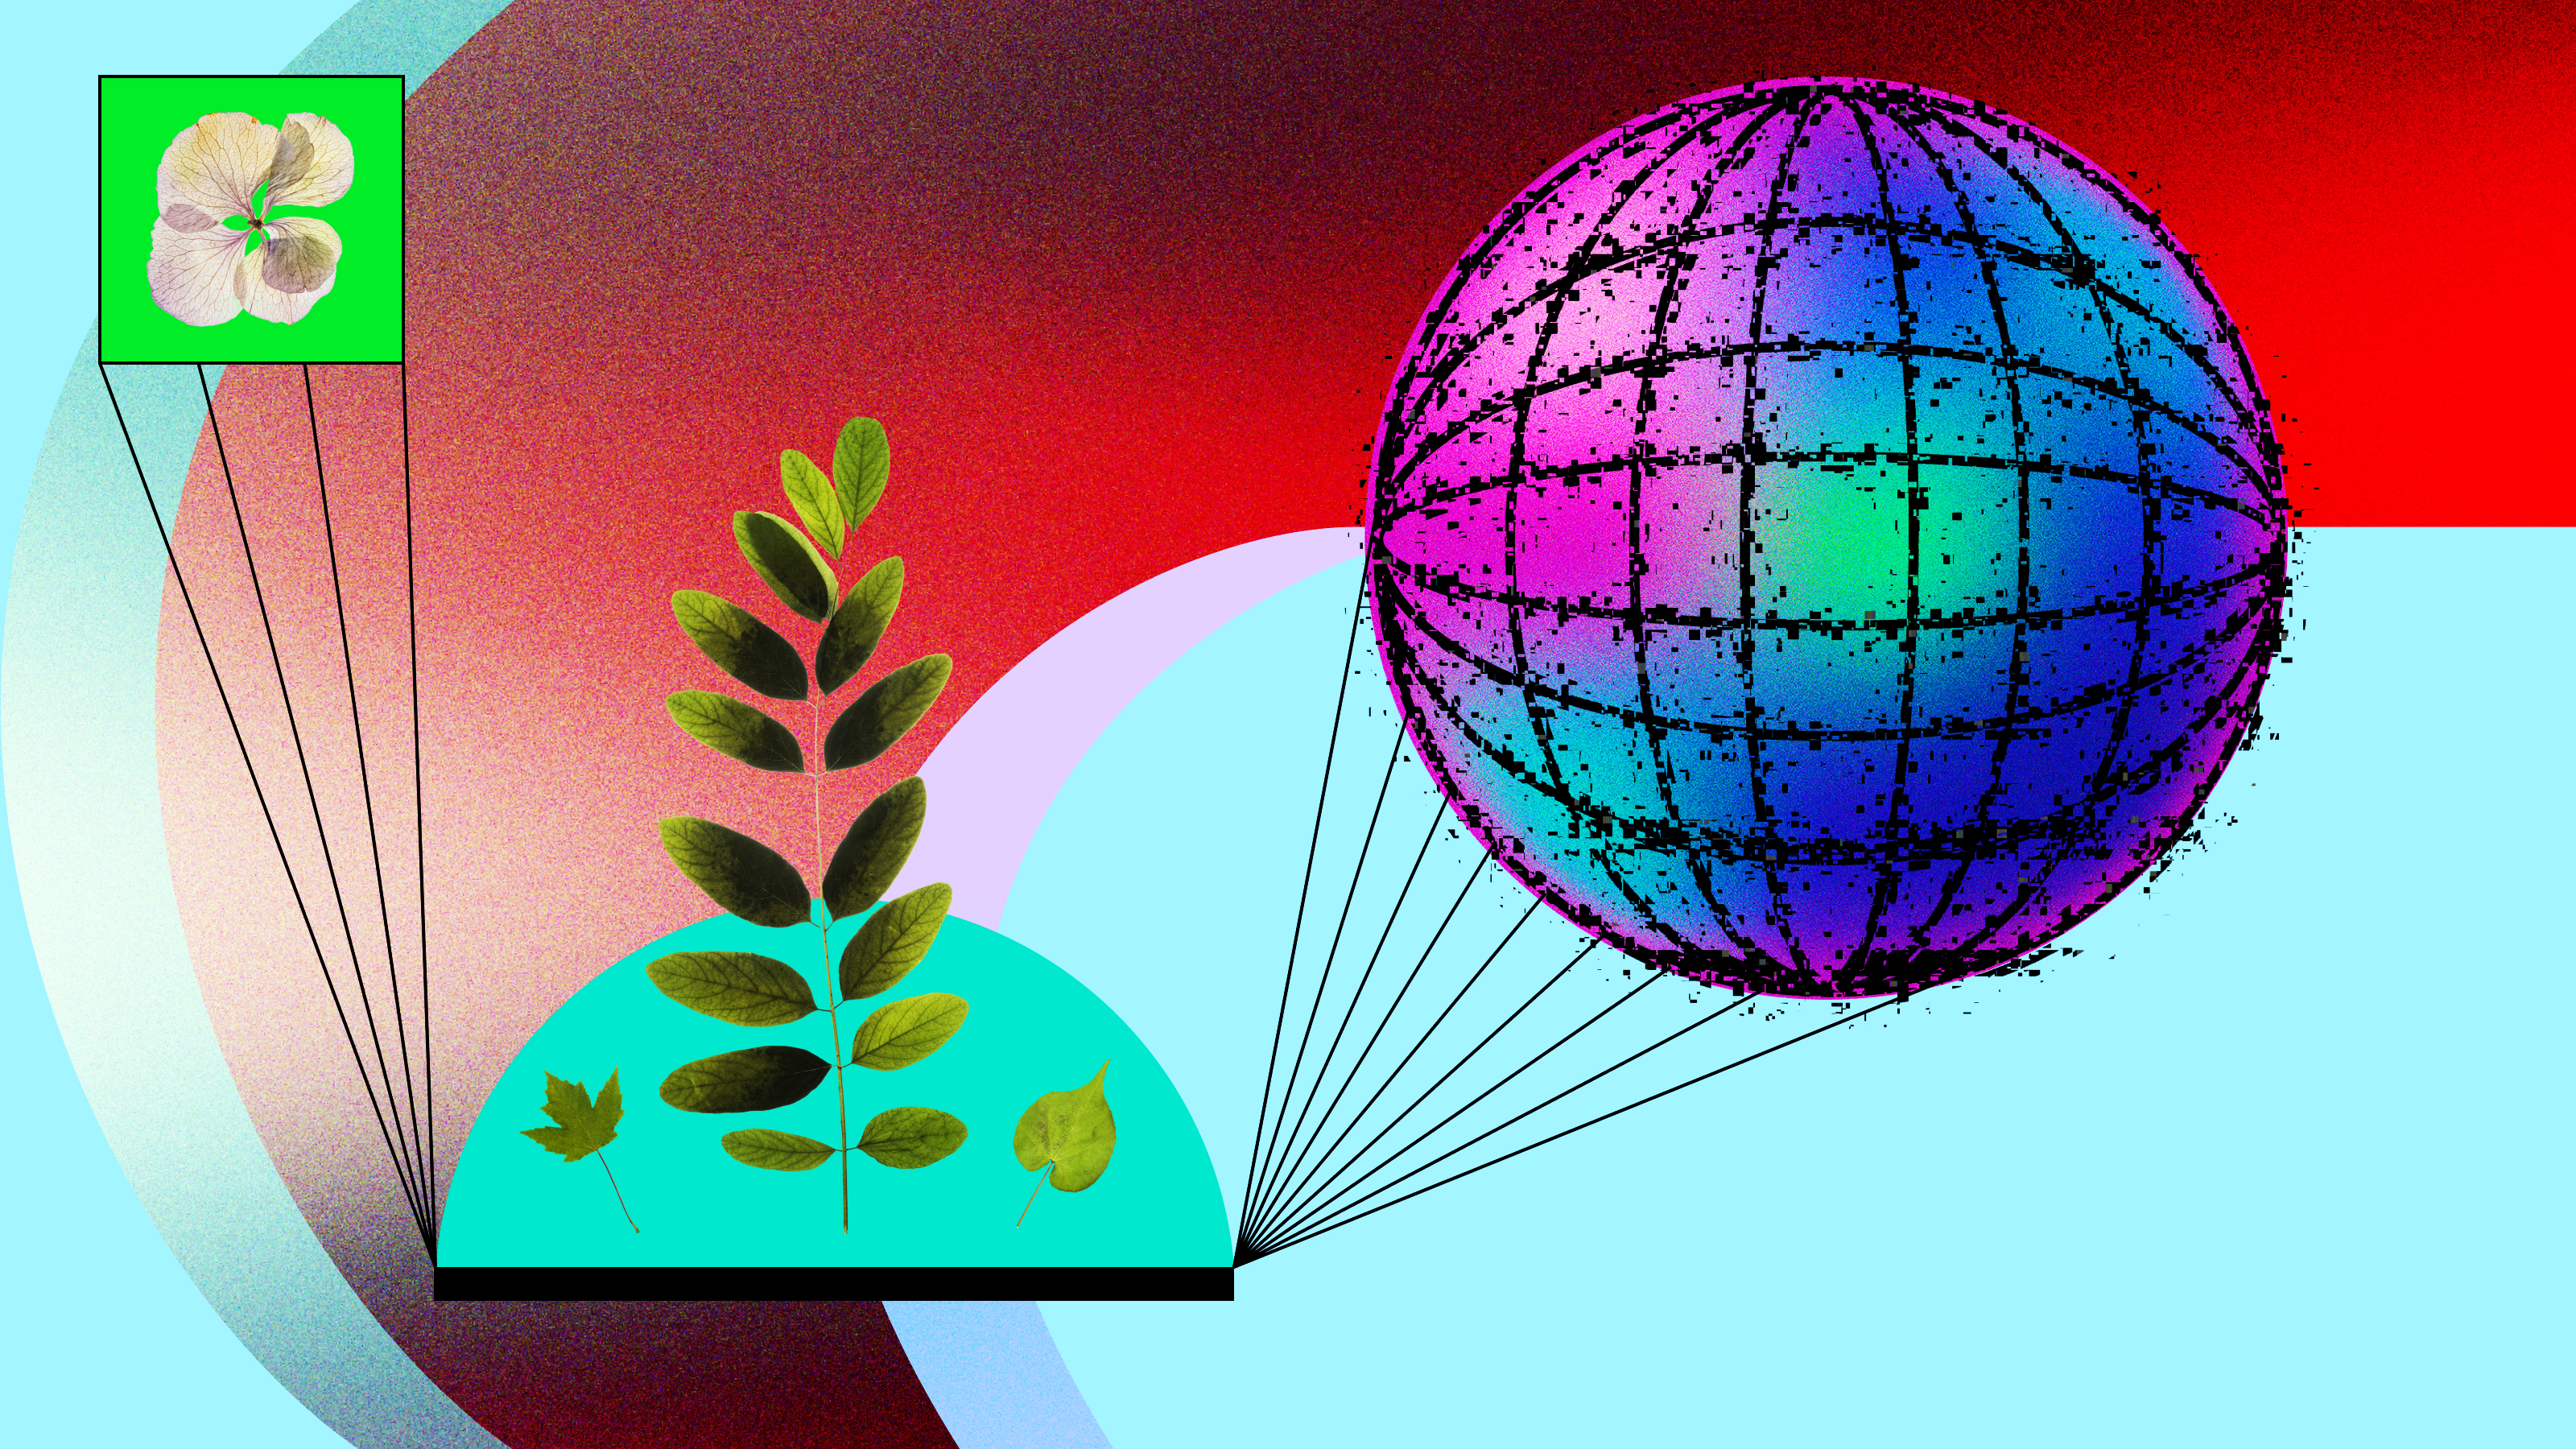 a computer generated image of a balloon and a plant.